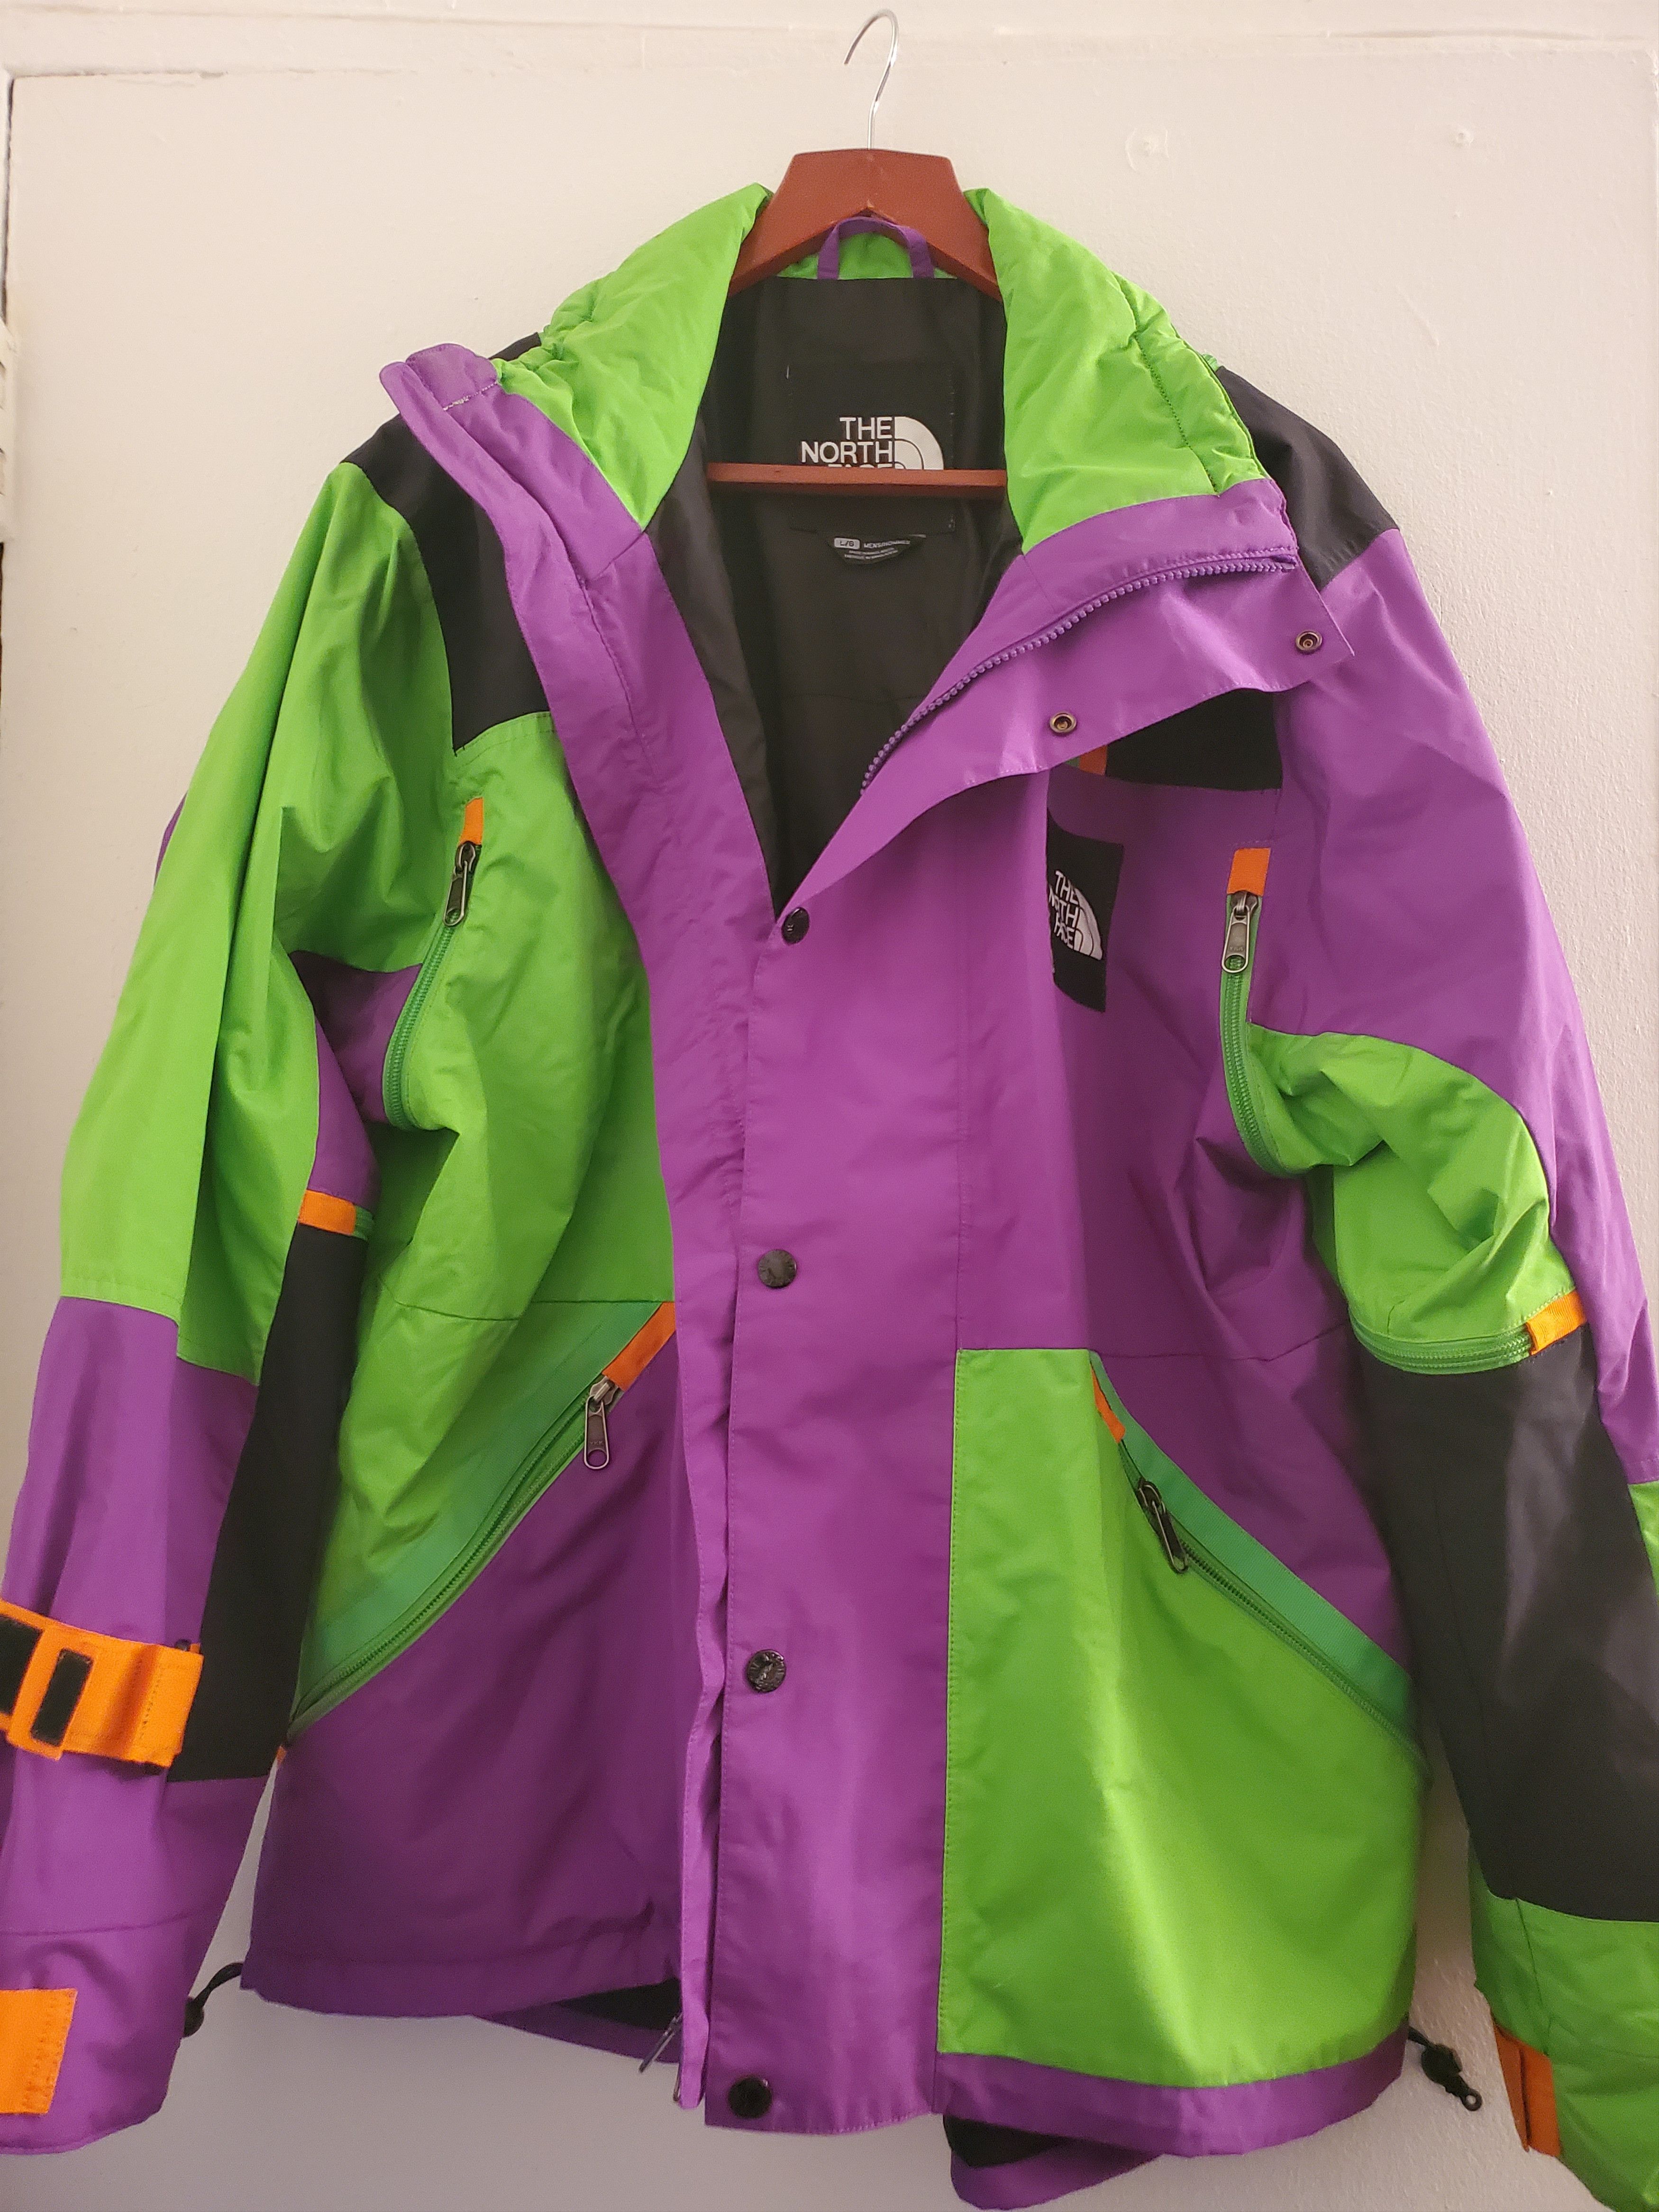 The North Face Vintage 90s North Face Tonar Jacket | Grailed